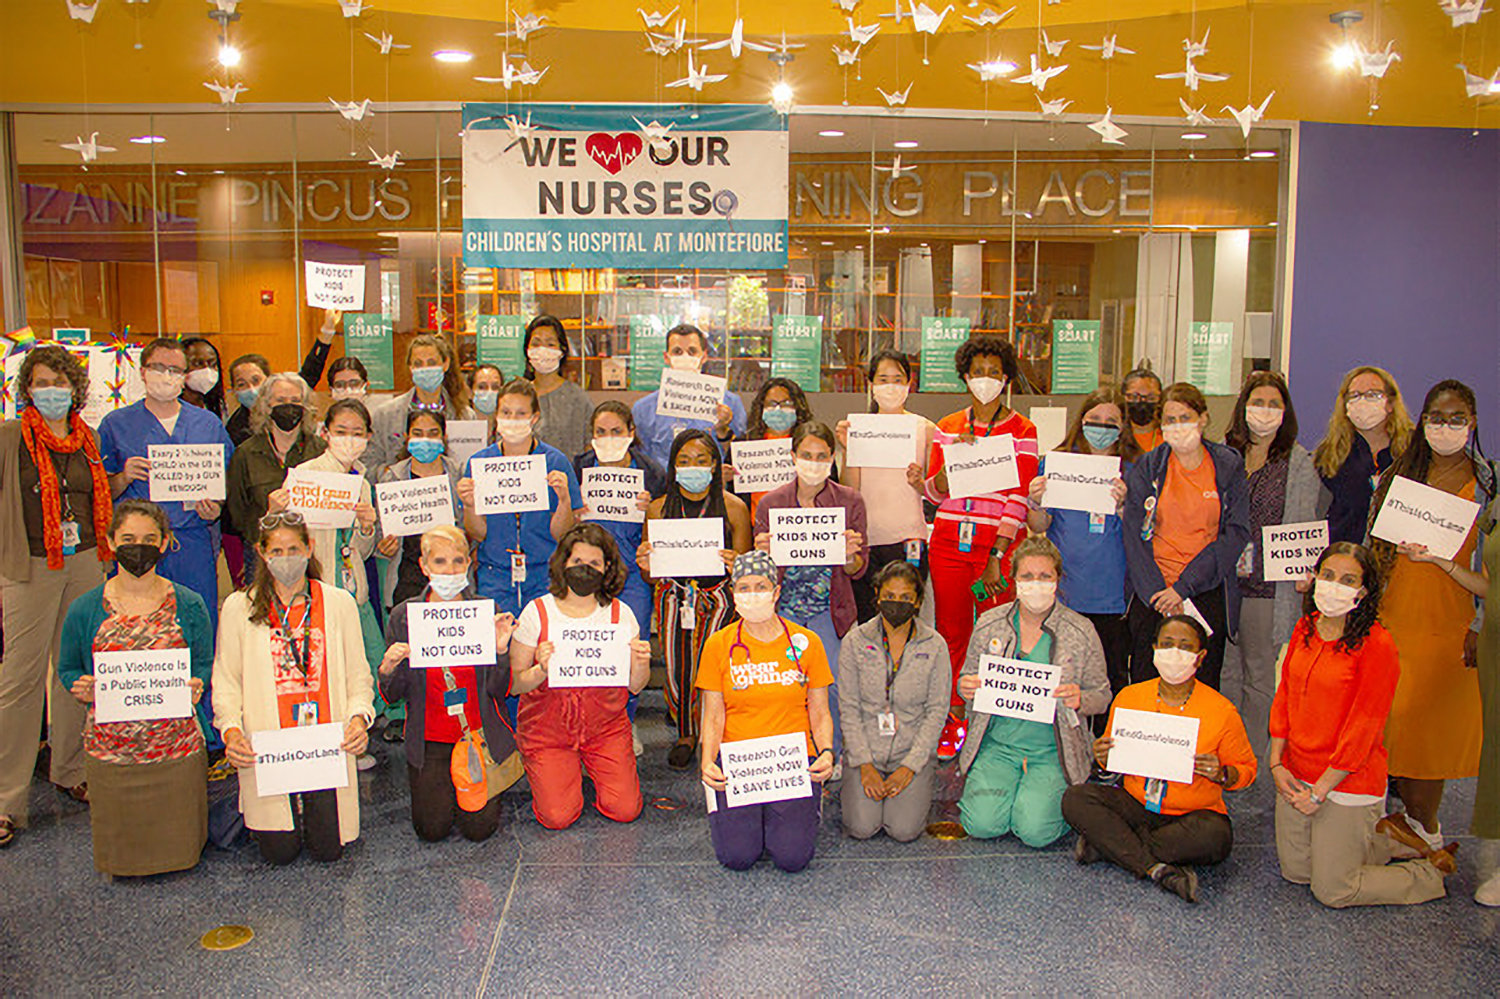 The Children’s Hospital at Montefiore gathered to raise awareness and share ‘Be Smart’ campaign information with patients, families and staff during gun violence awareness day on June 3. A team of the organization’s clinicians looks to normalize conversations about gun safety.